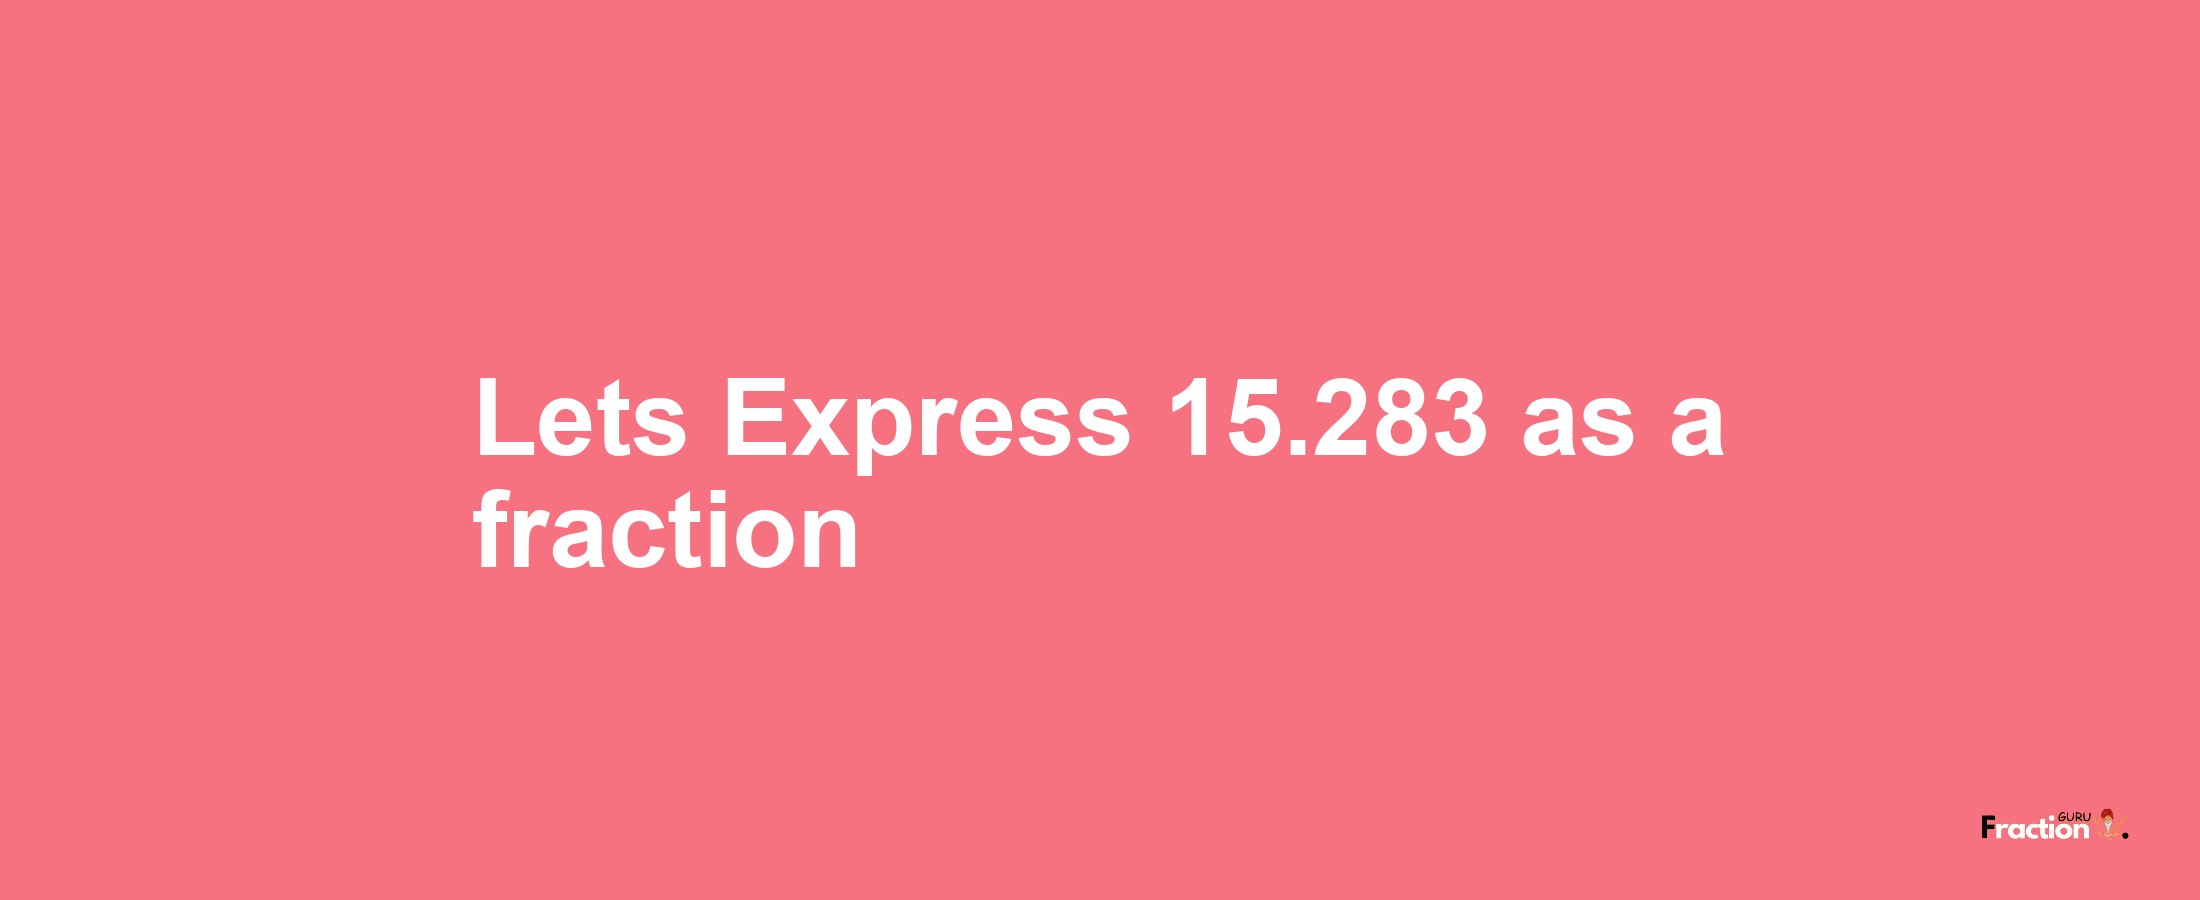 Lets Express 15.283 as afraction